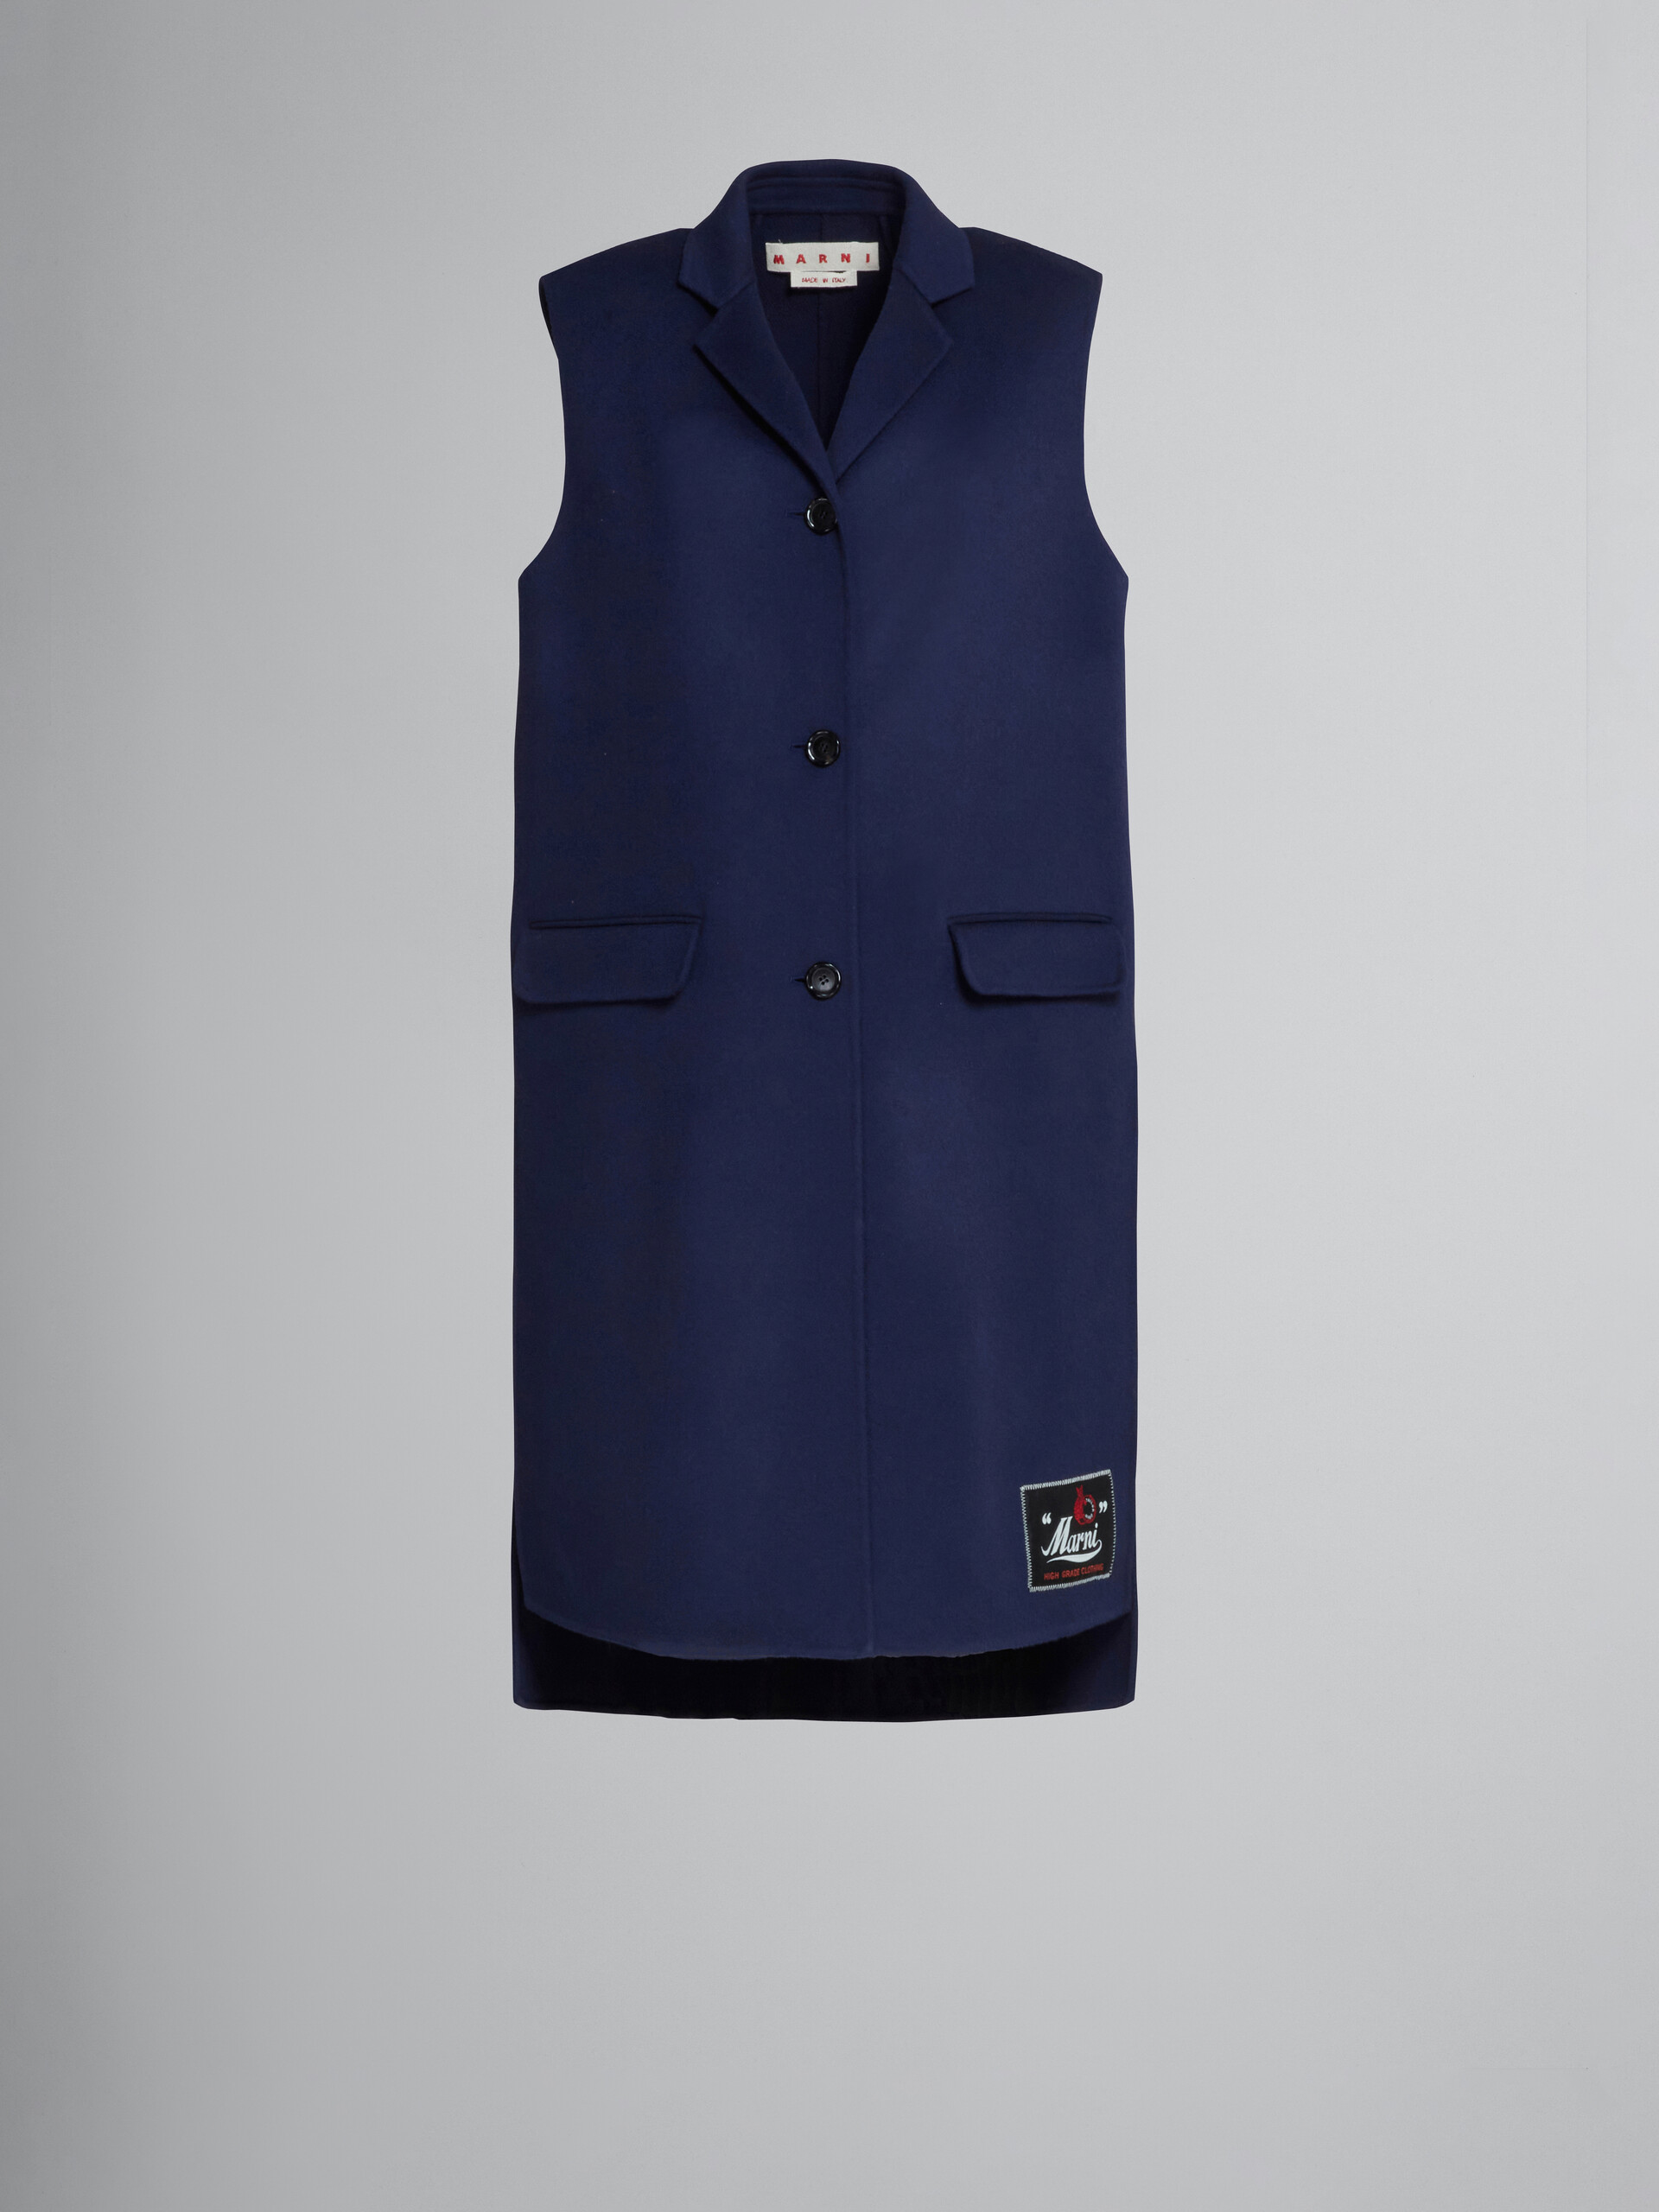 Long blue vest in wool and cashmere - Waistcoat - Image 1